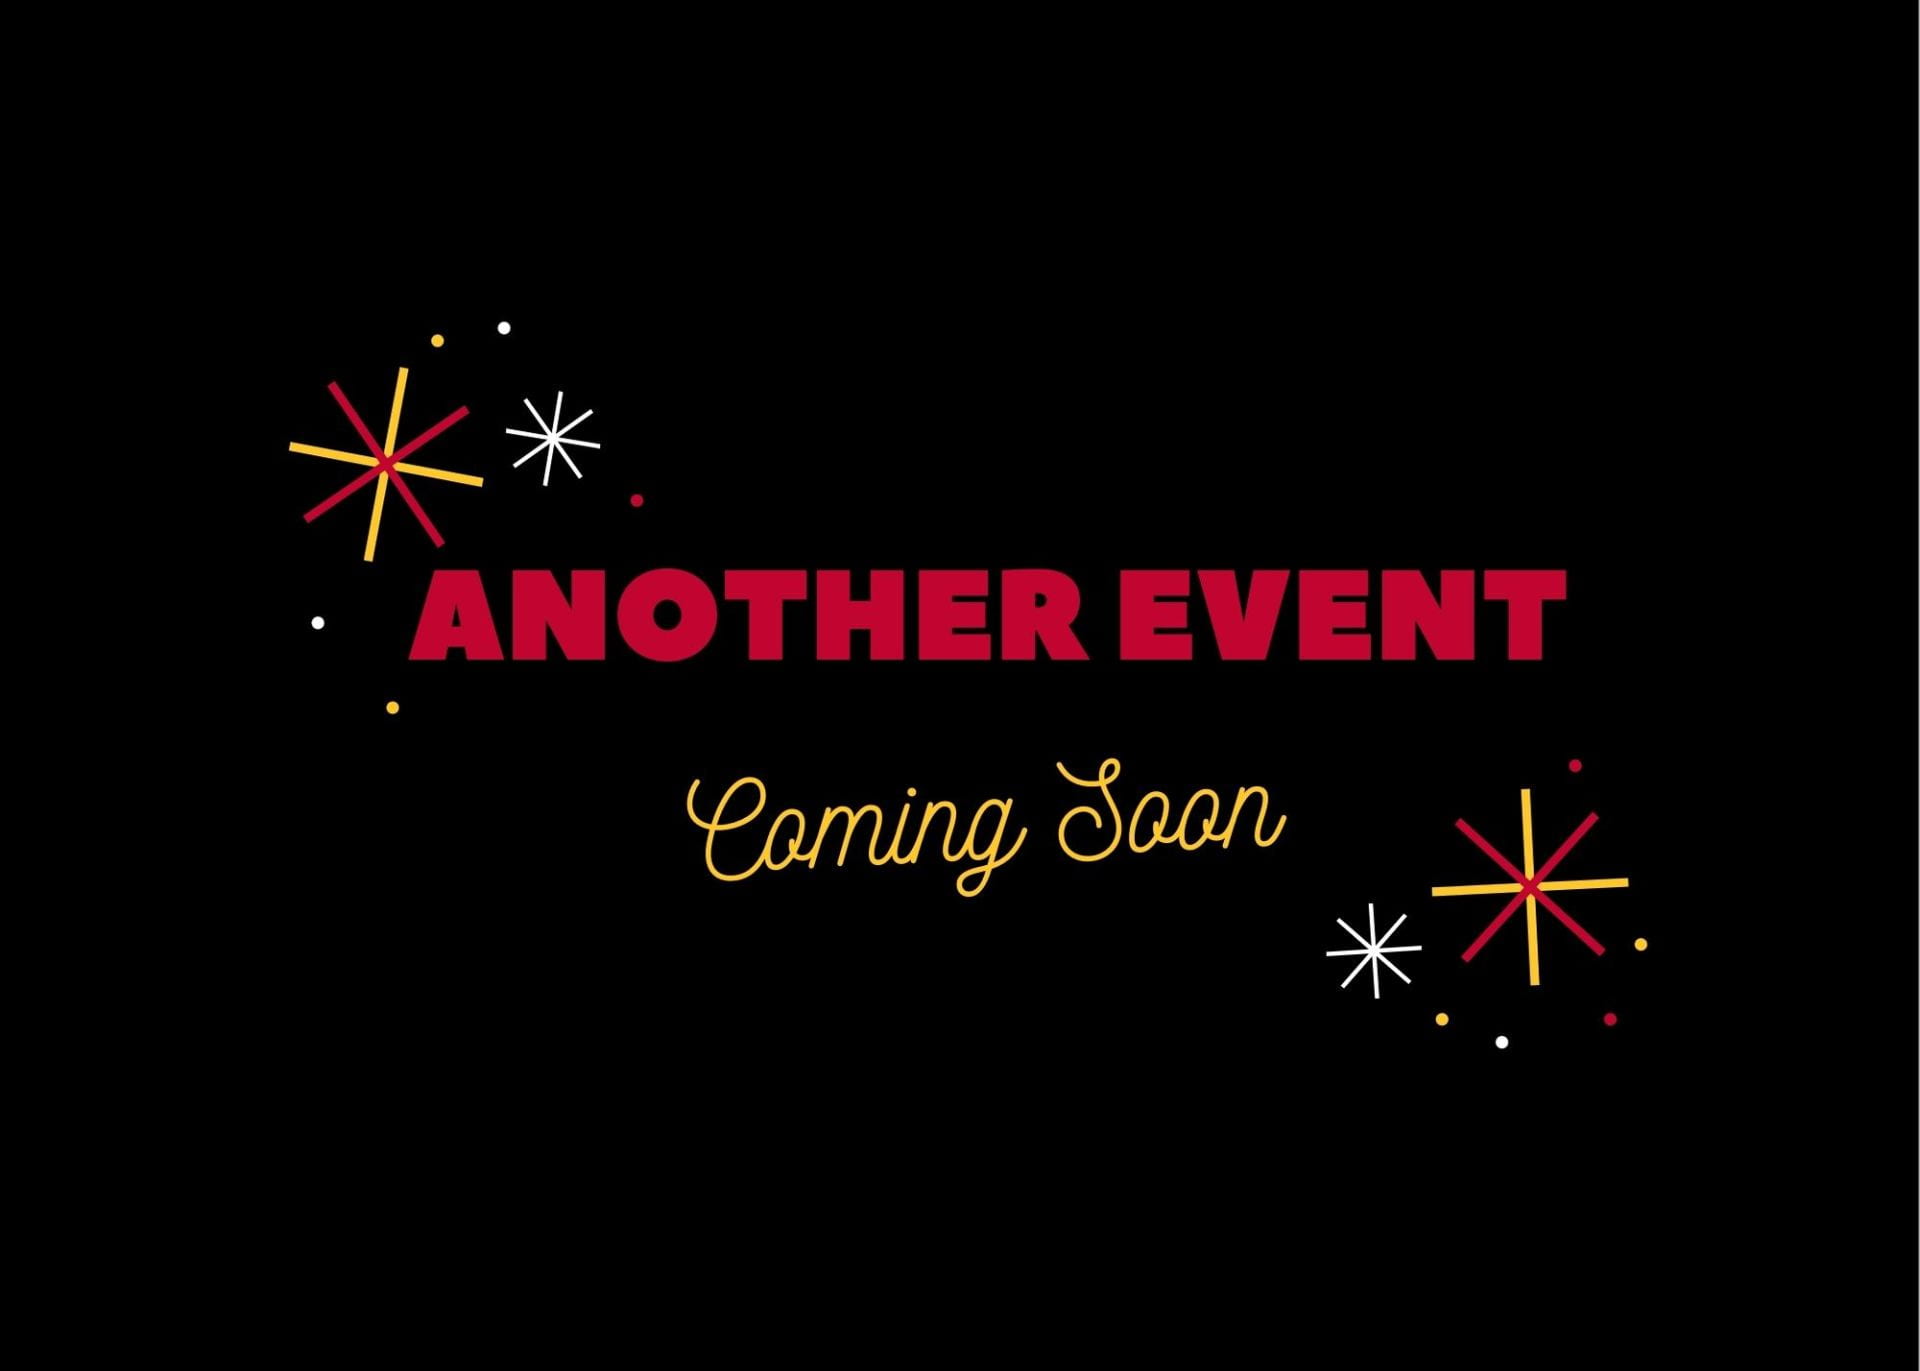 "Another Event Coming Soon" 